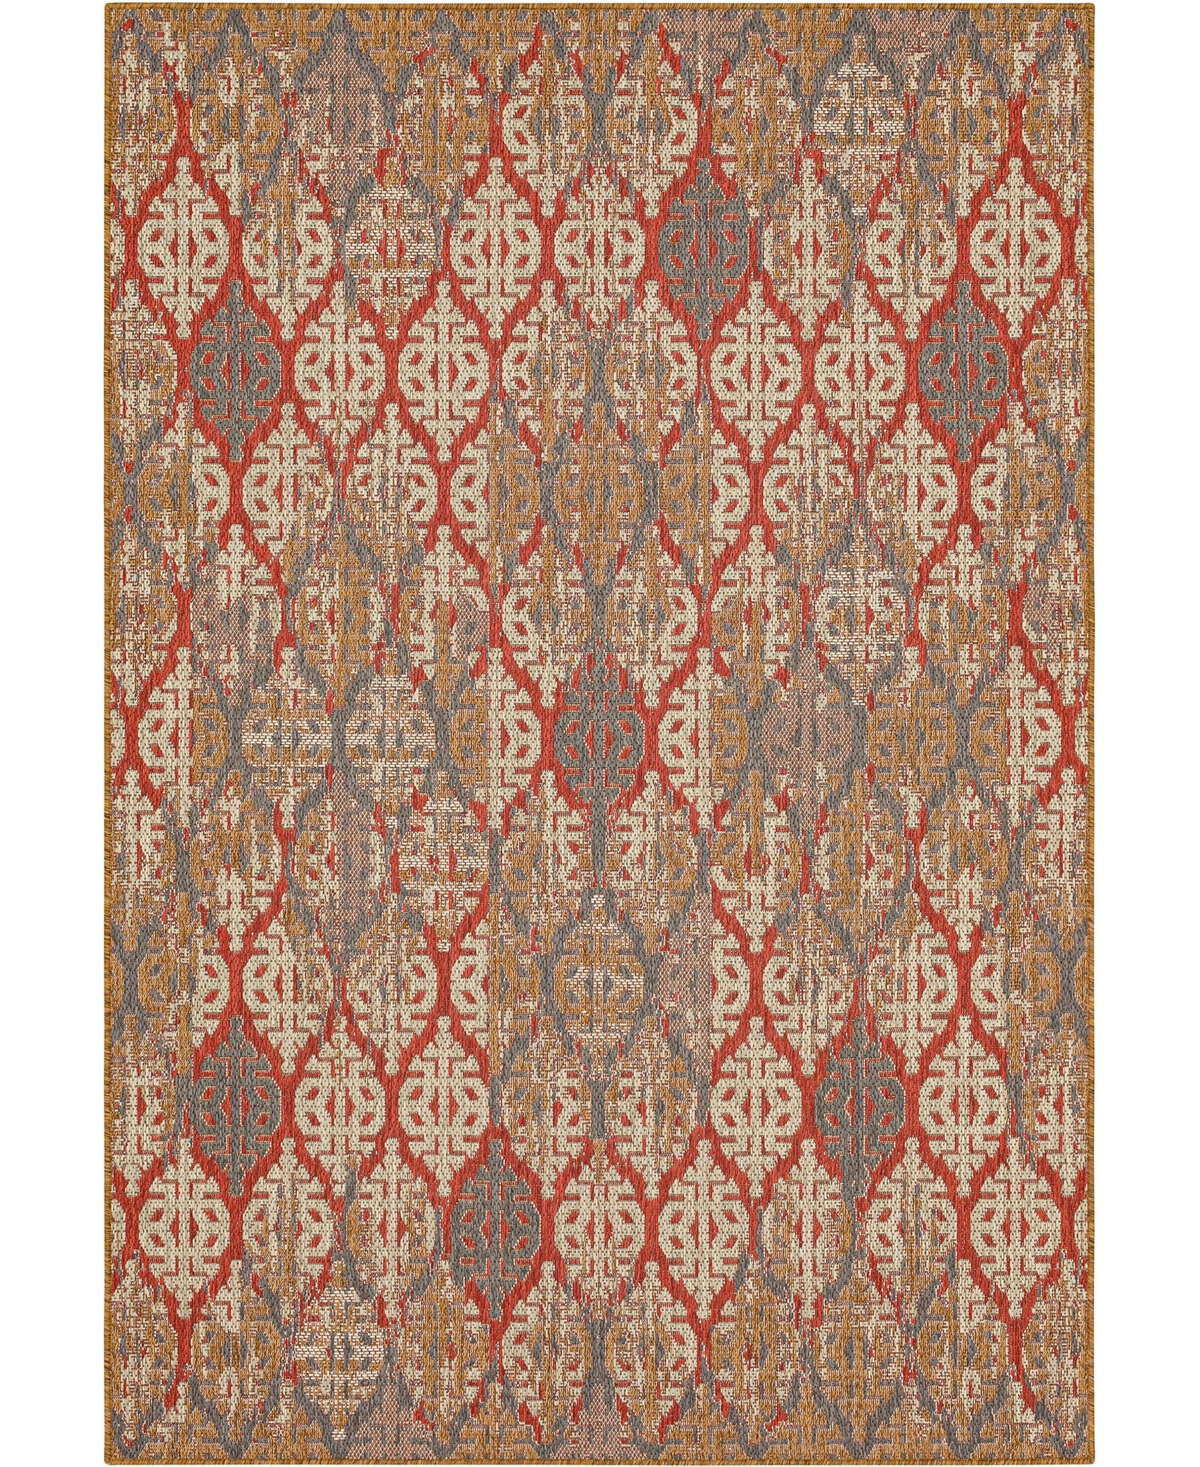 Mohawk Malibu Outdoor Stamped Ikat 5'3" X 7'6" Area Rug In Red